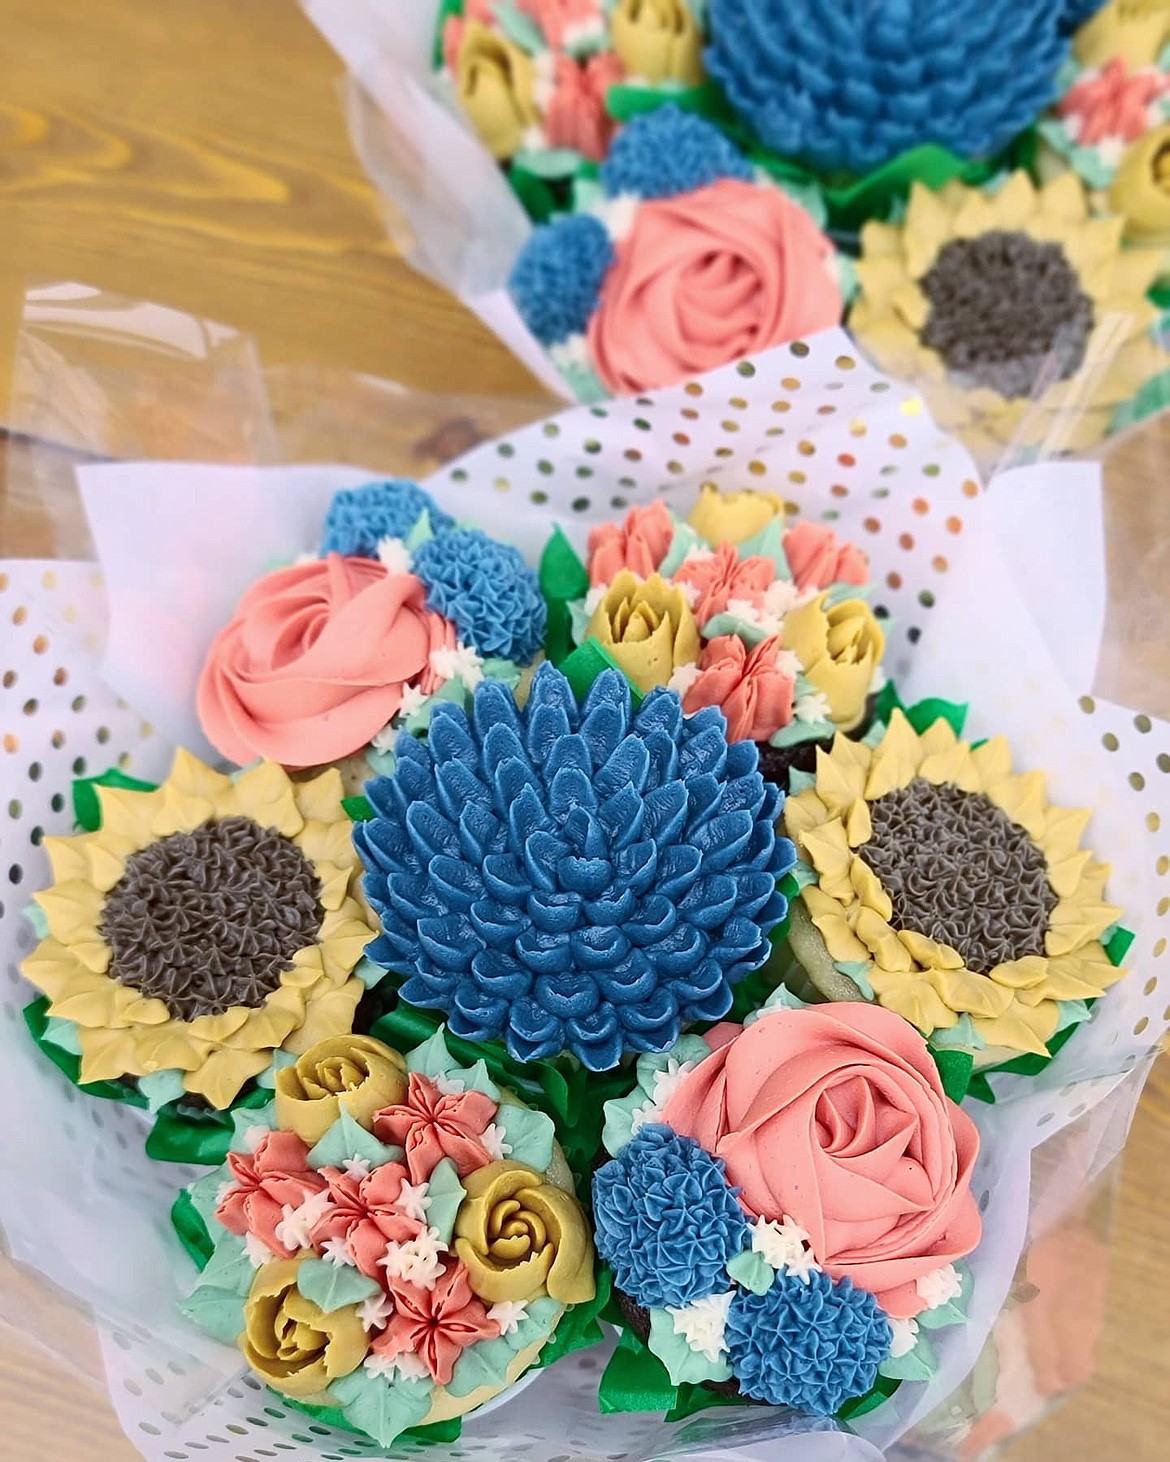 Marin Blandon of Sugar Happy Cupcakes in Kalispell expects to make 1,500 cupcakes per week this summer, in part due to increased demand from wedding events. (Courtesy of Marin Blandon)